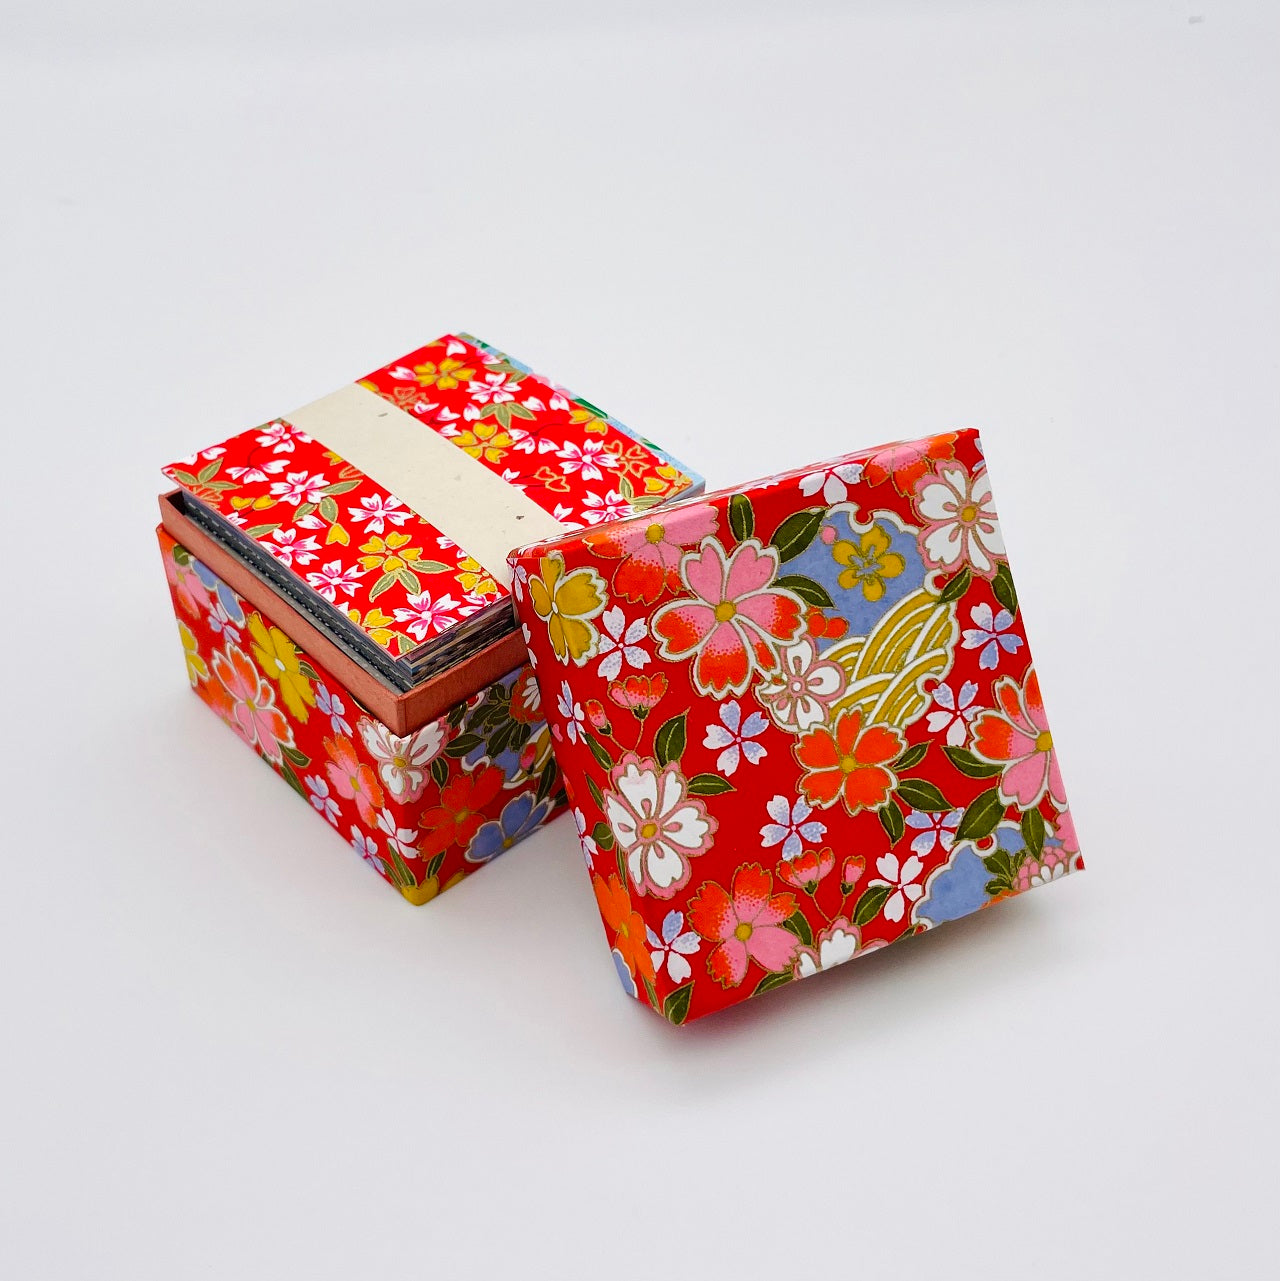 Hesroicy 14 Sheets Origami Papers Japanese Style Decorative Square